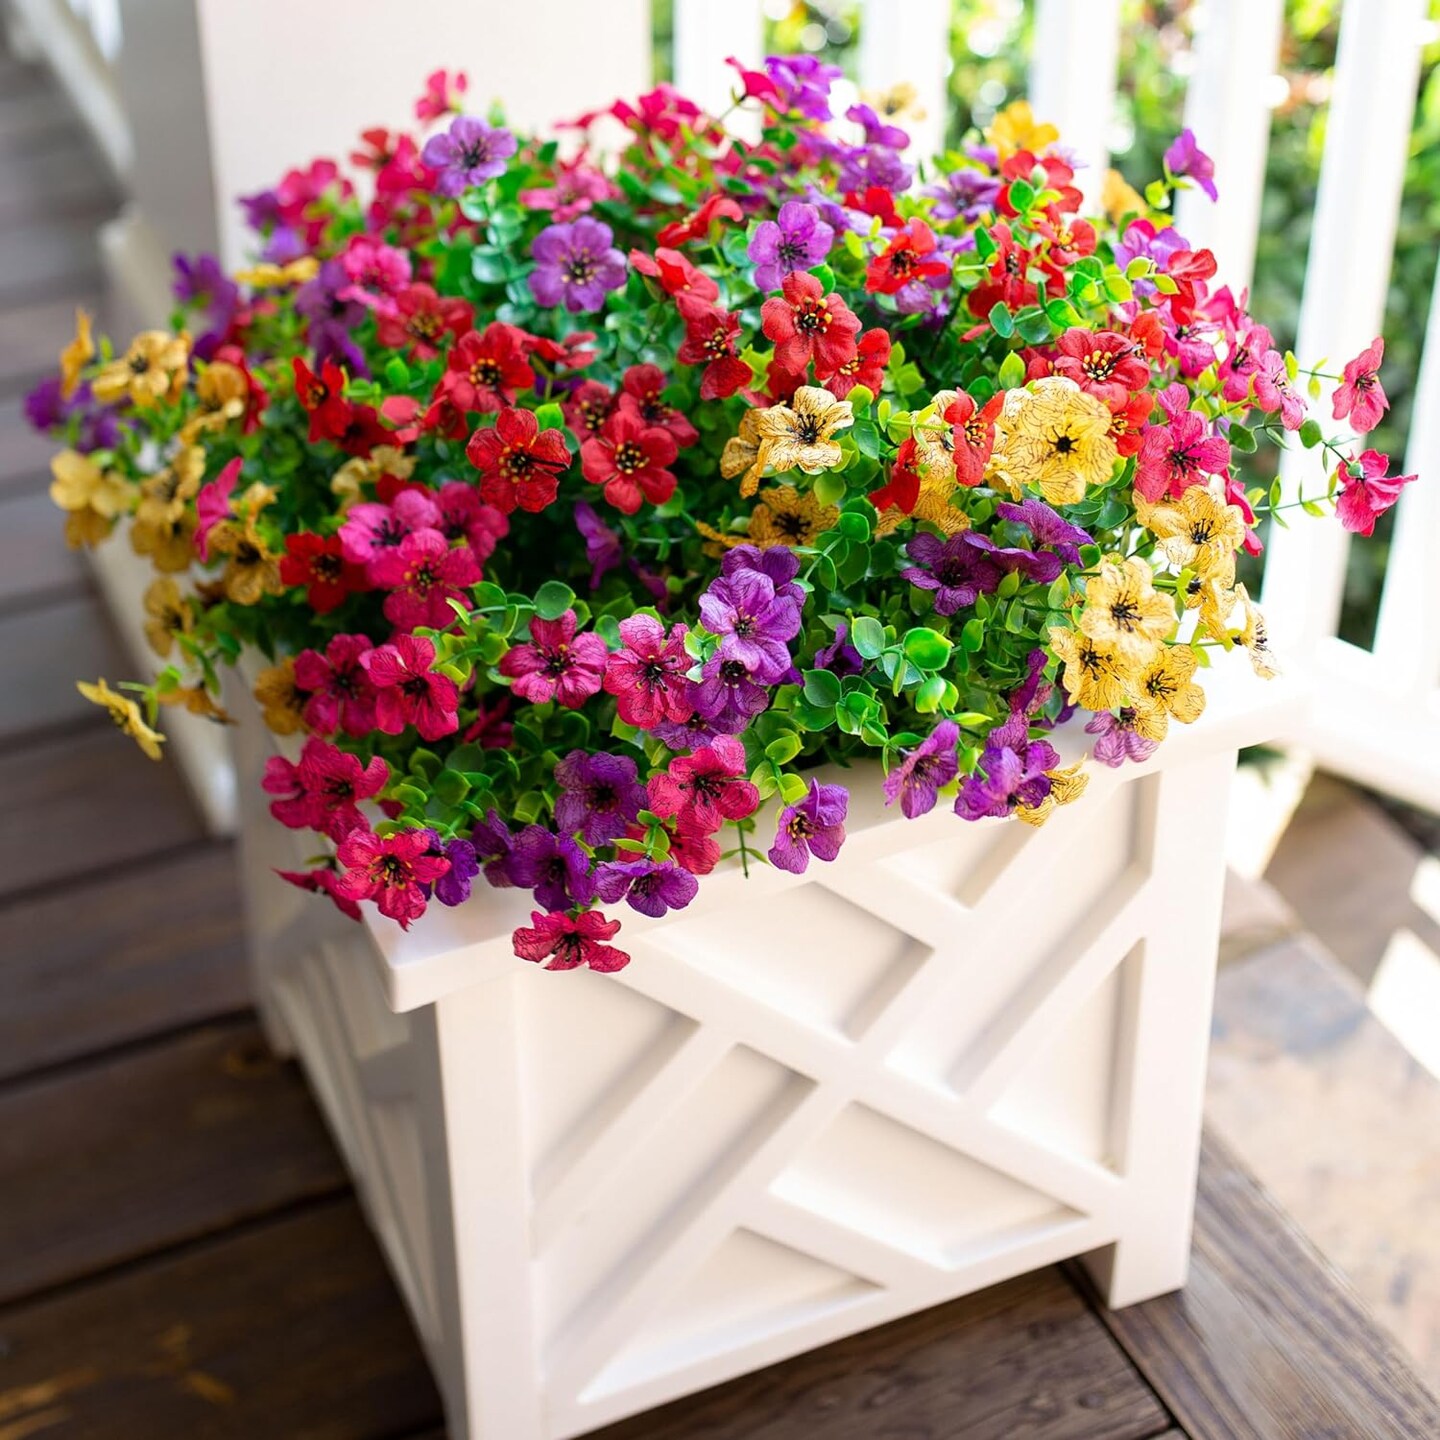 Artificial Fake Plants Flowers for Outside Spring Summer Decoration, 12 Bundles Faux Silk Colorful Mix. Daisy UV Sun Resistant, Realistic for Porch Patio Home Planter Window Box Yard